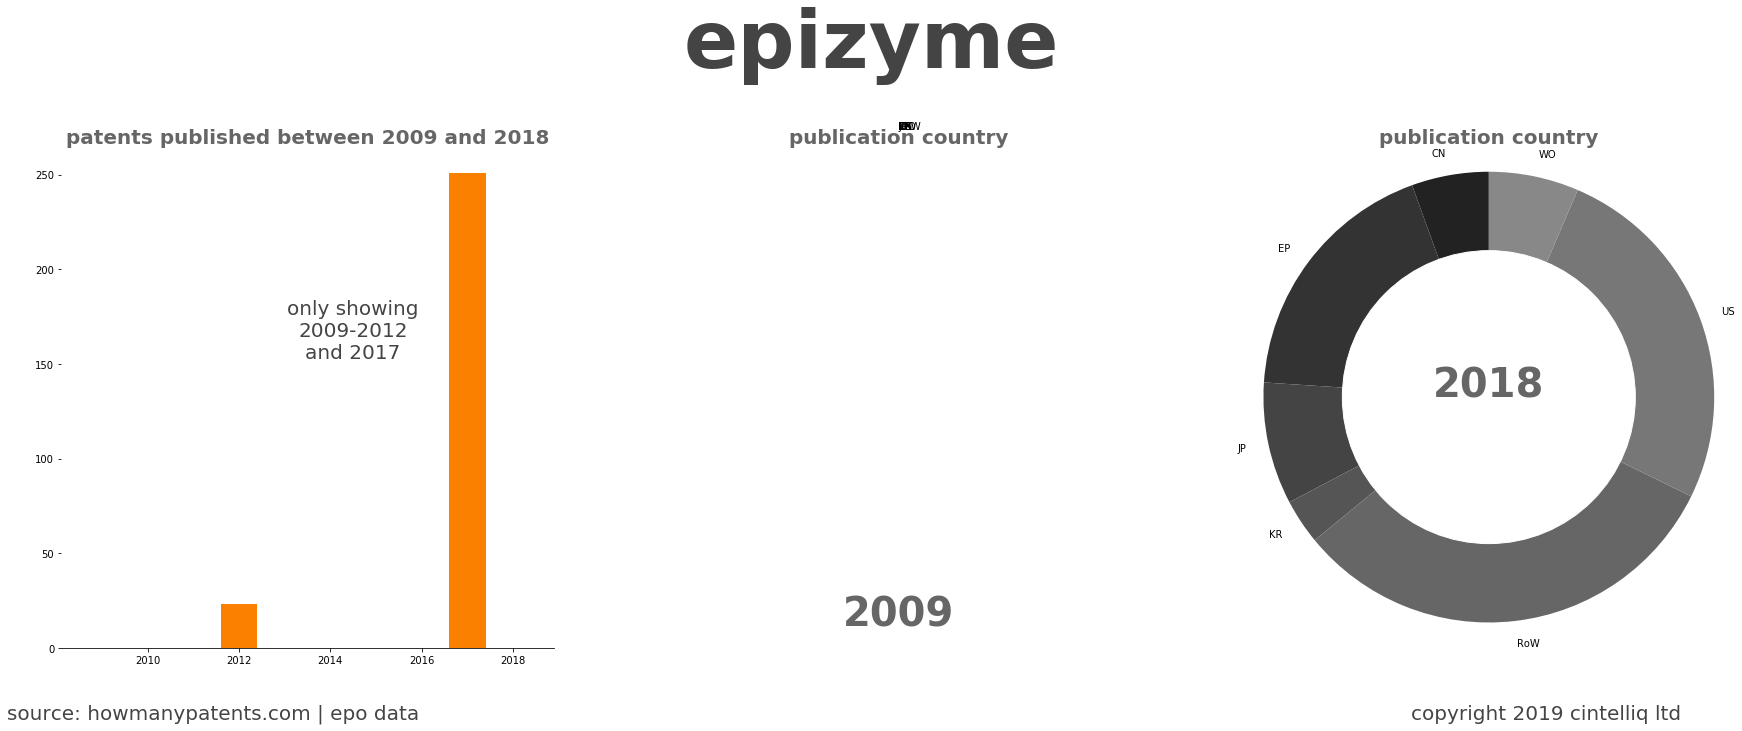 summary of patents for Epizyme